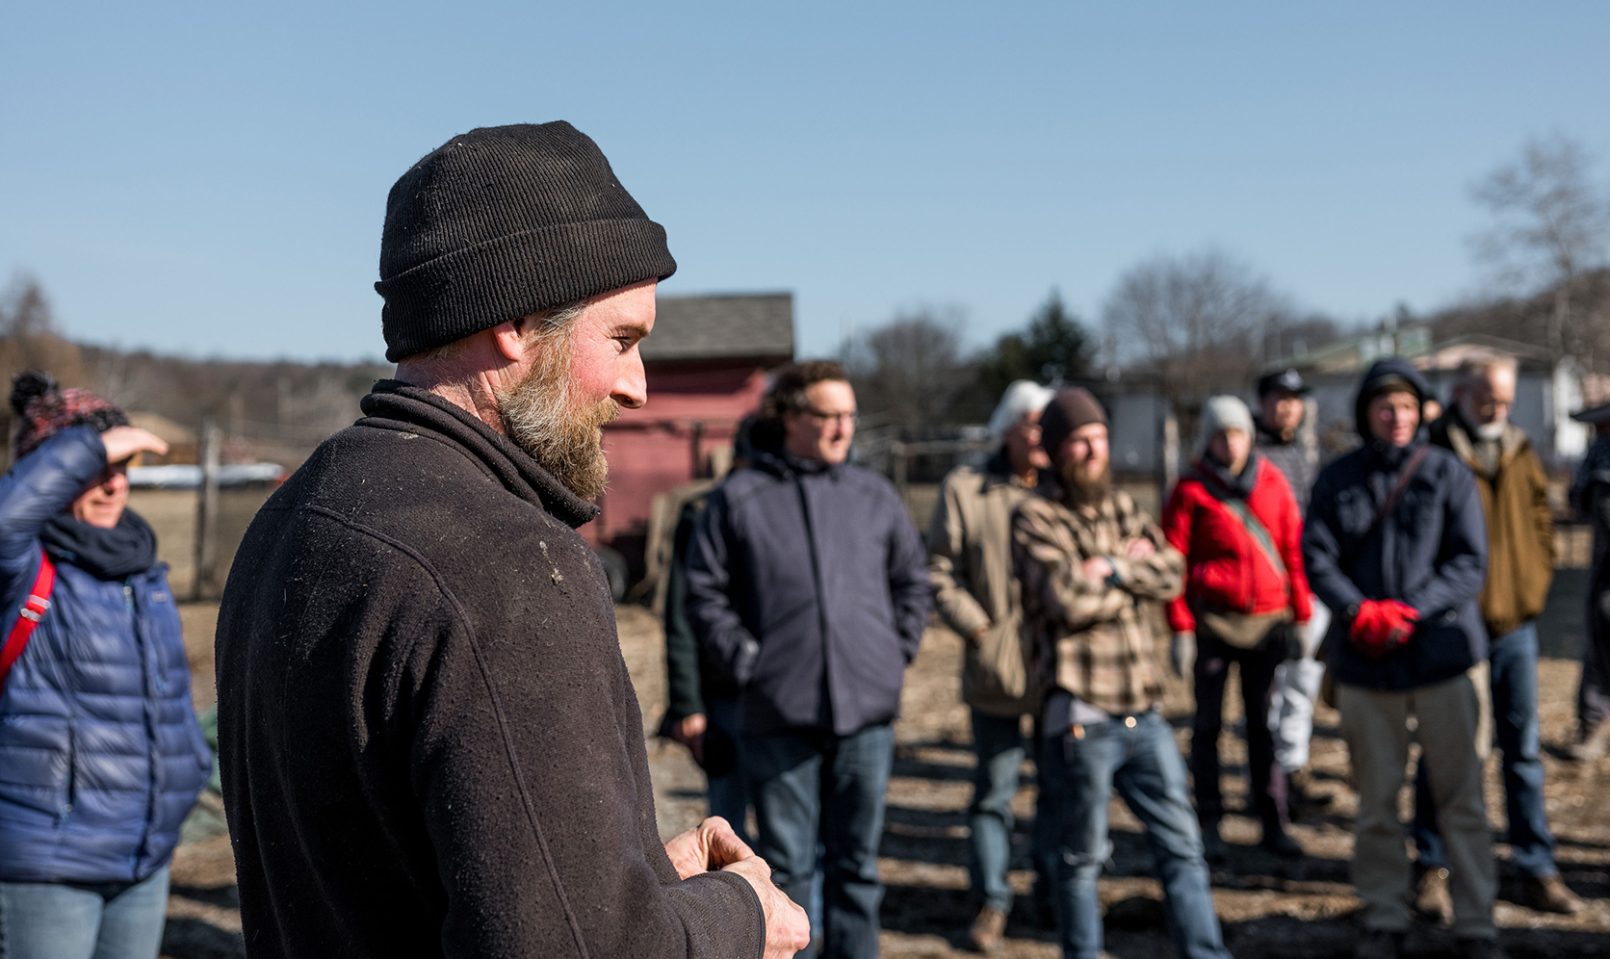 focus on Spencer Fenniman, farm manager, as he stands outside with a group of people giving the IMA soil demonstration